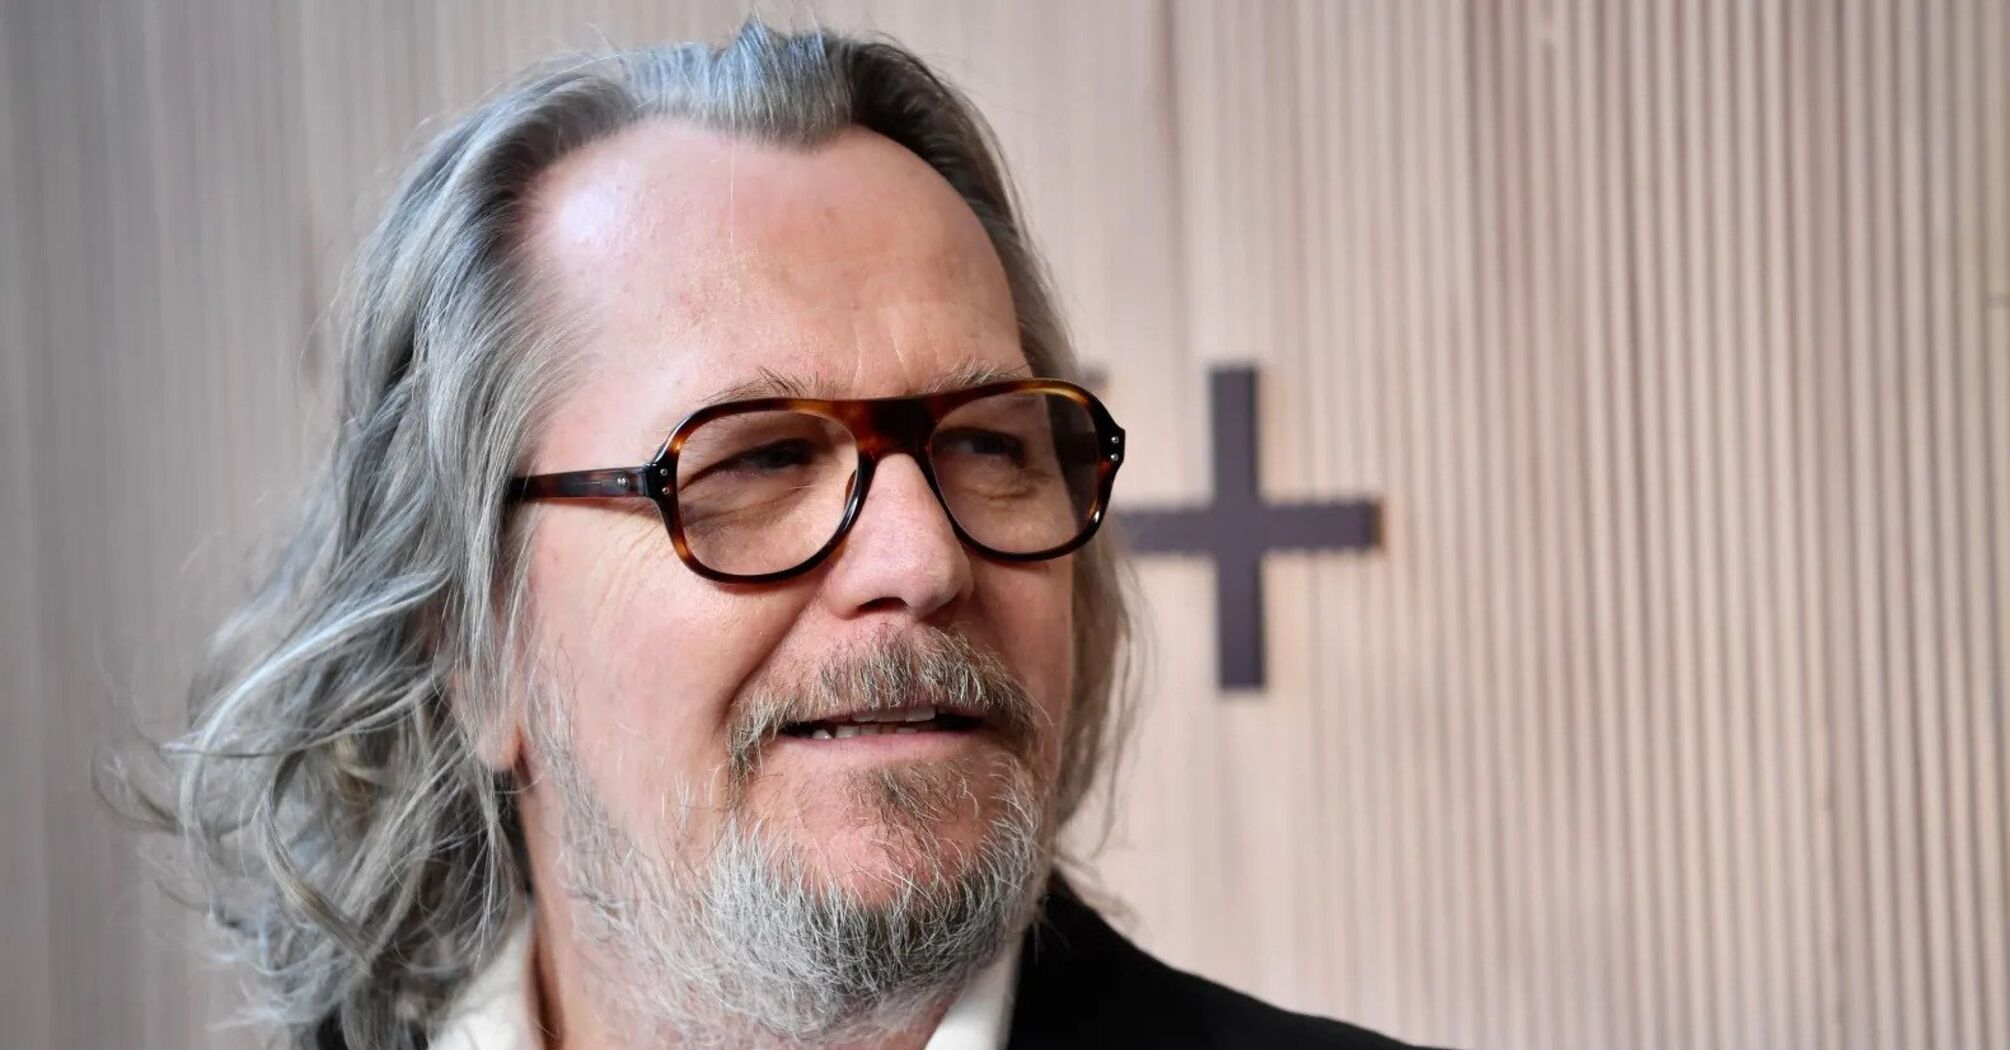 The Top 5 Gary Oldman Movies Ranked